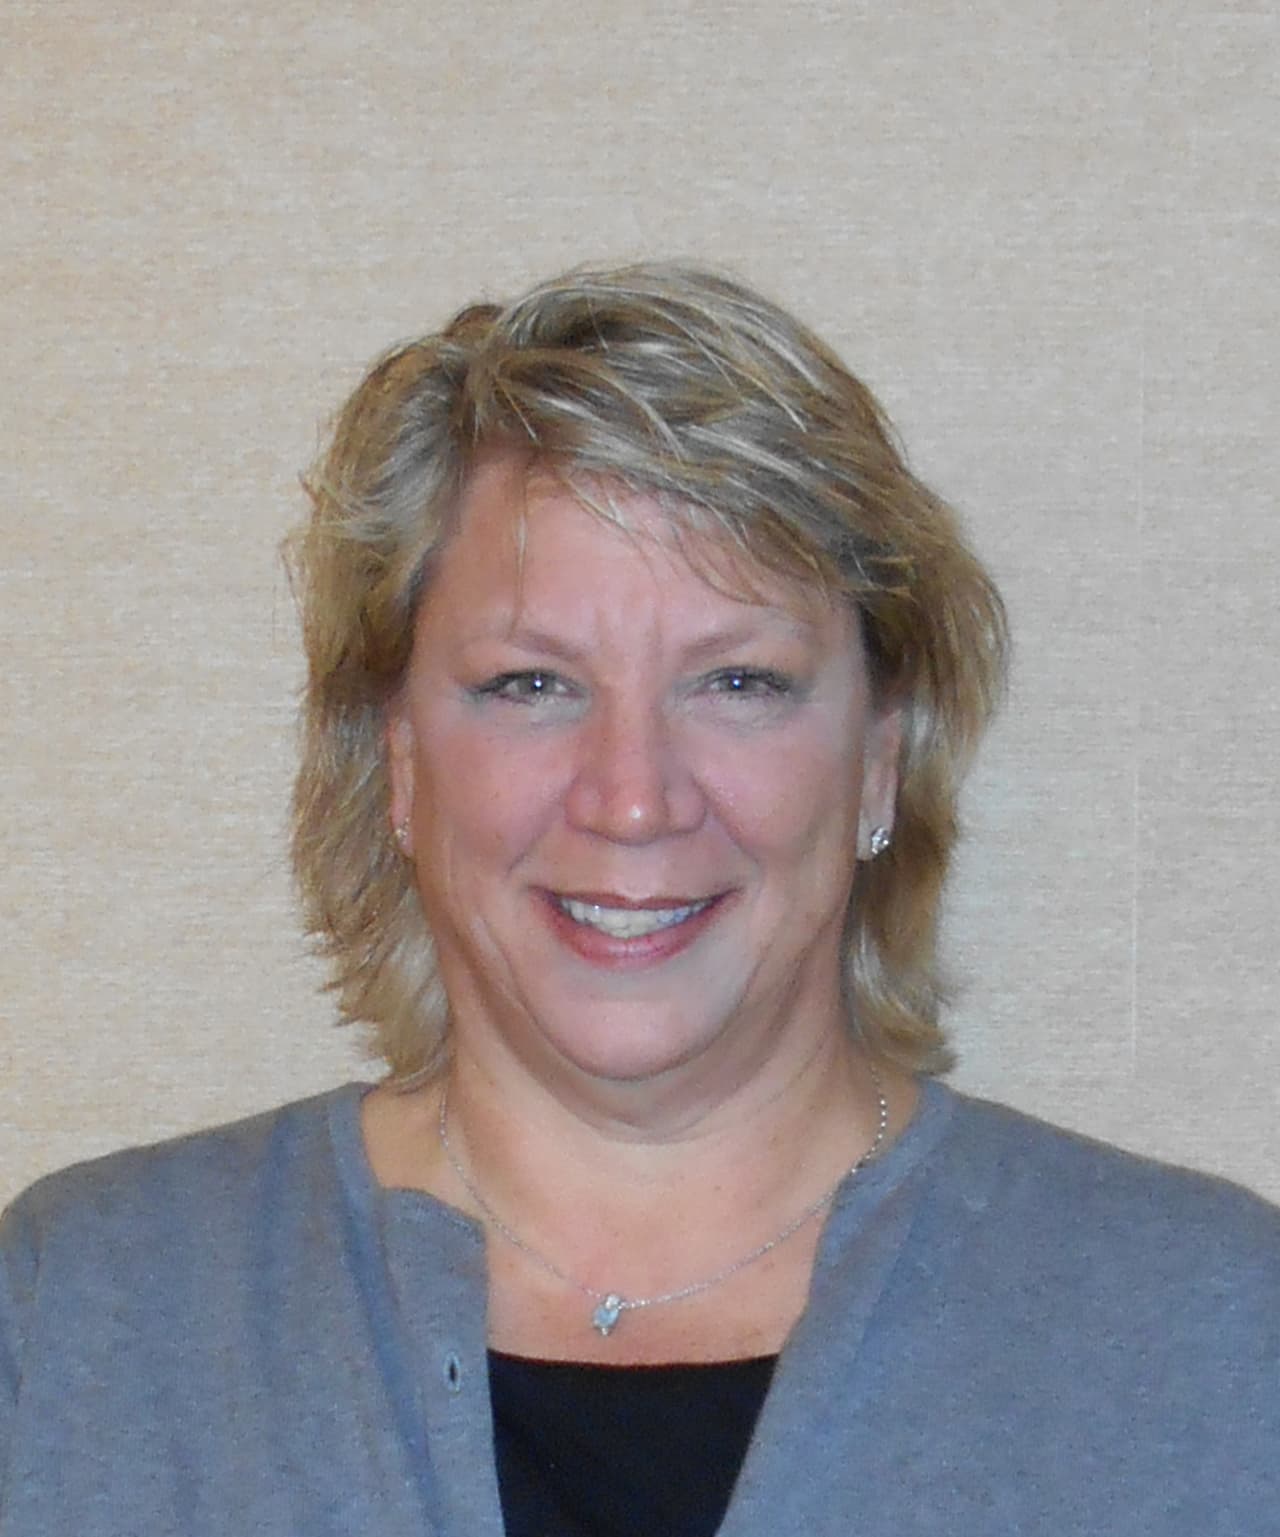 Renee Tucker has been appointed to the new controller position at Waveny LifeCare Network.